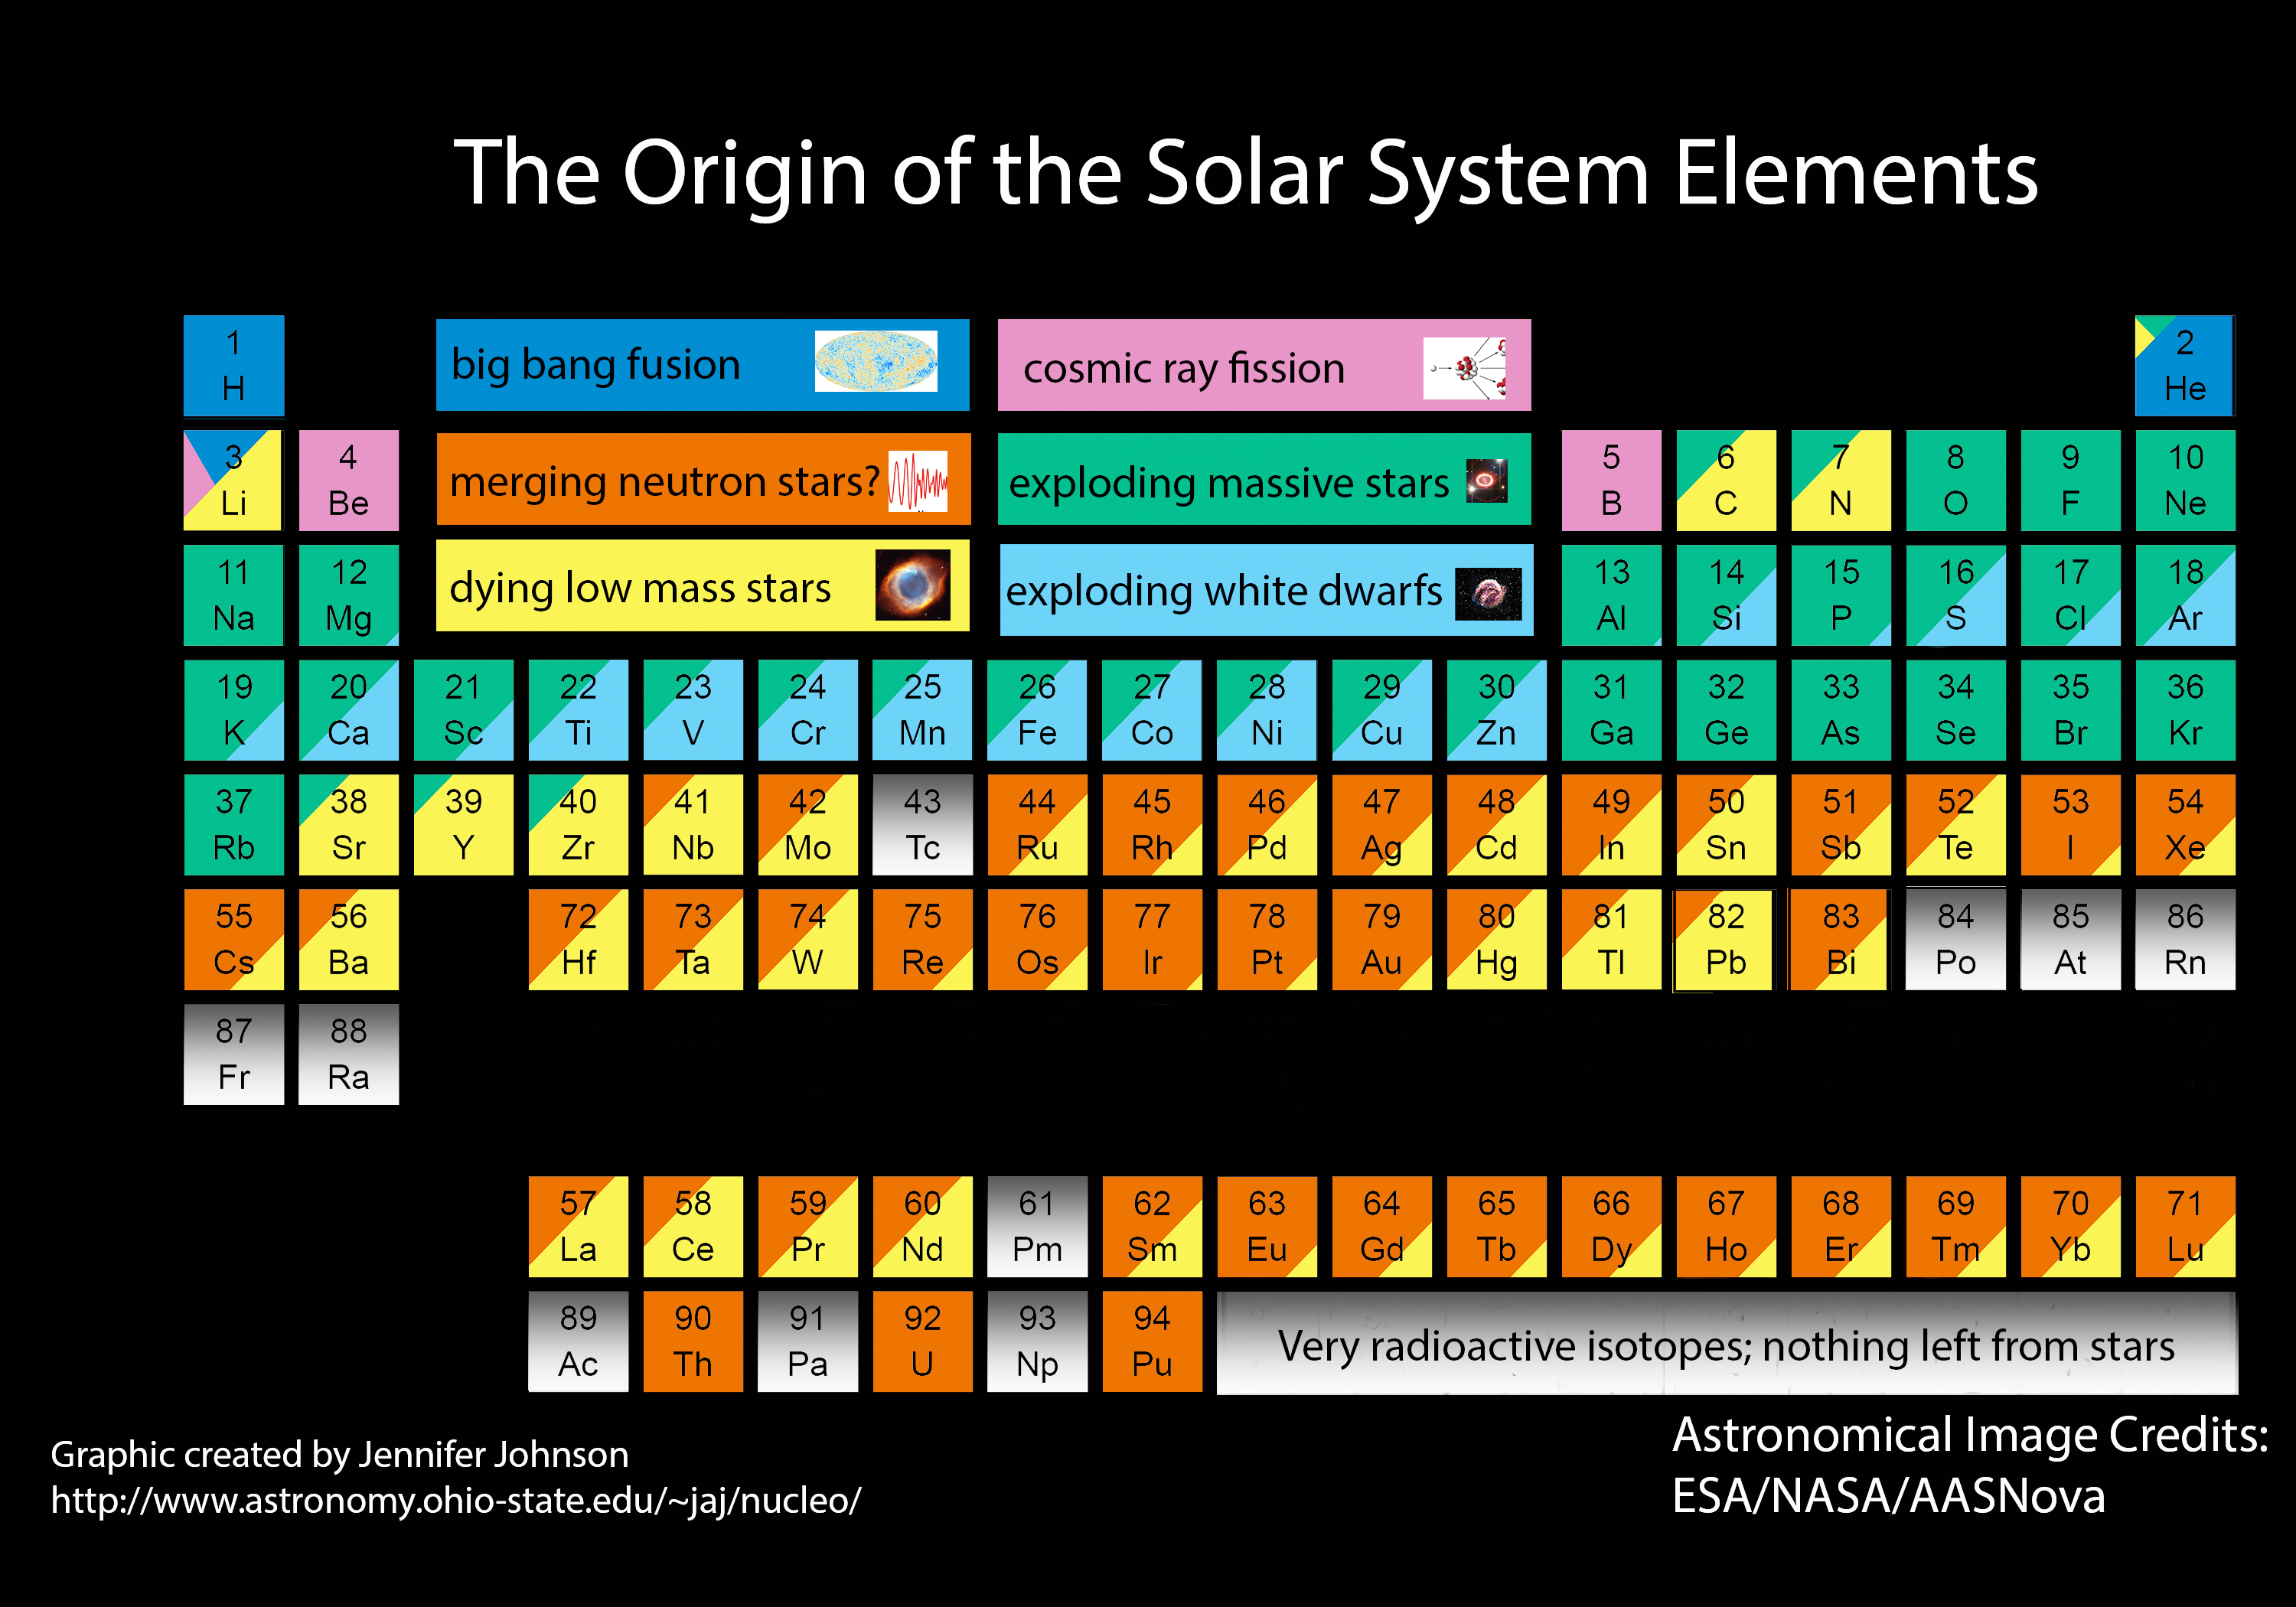 A version of the periodic table of elements indicating how the elements were created